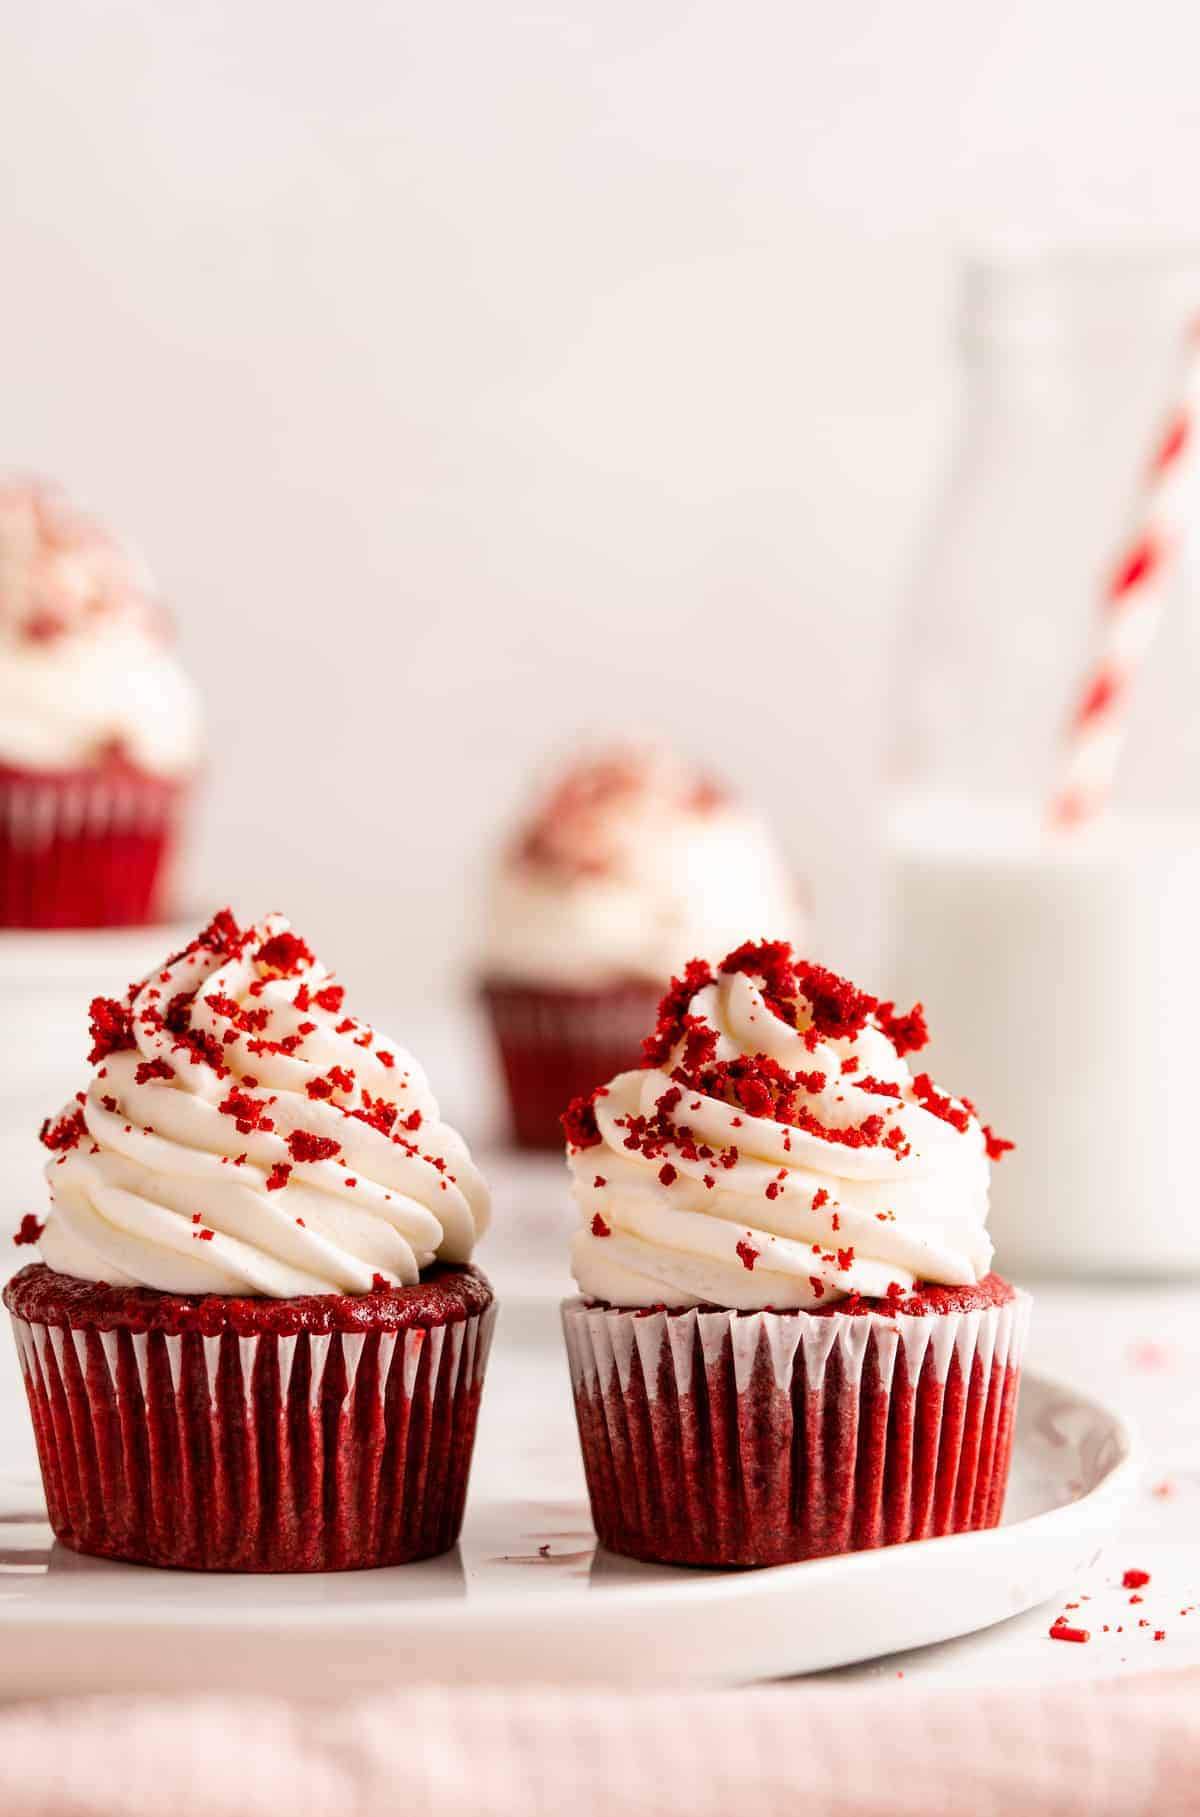 Two red velvet cupcakes decorated with tall peaks of cream cheese frosting and cake crumbs